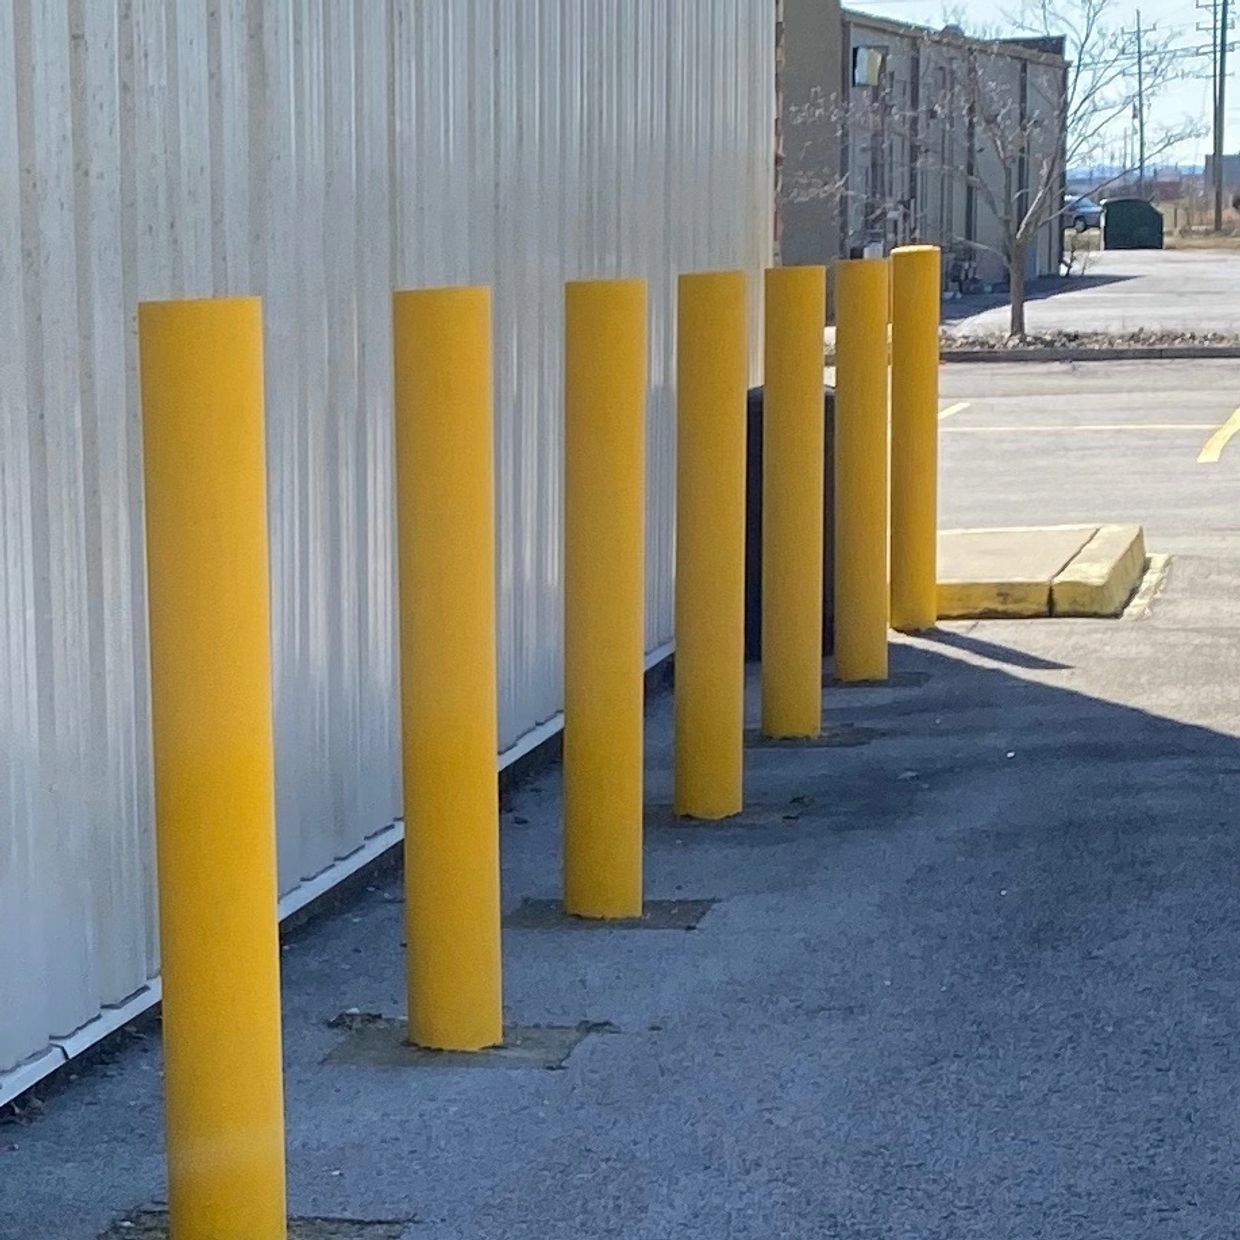 Parking Lot Bollards installed by A&S Sealcoating in Southern Indiana and Louisville. 